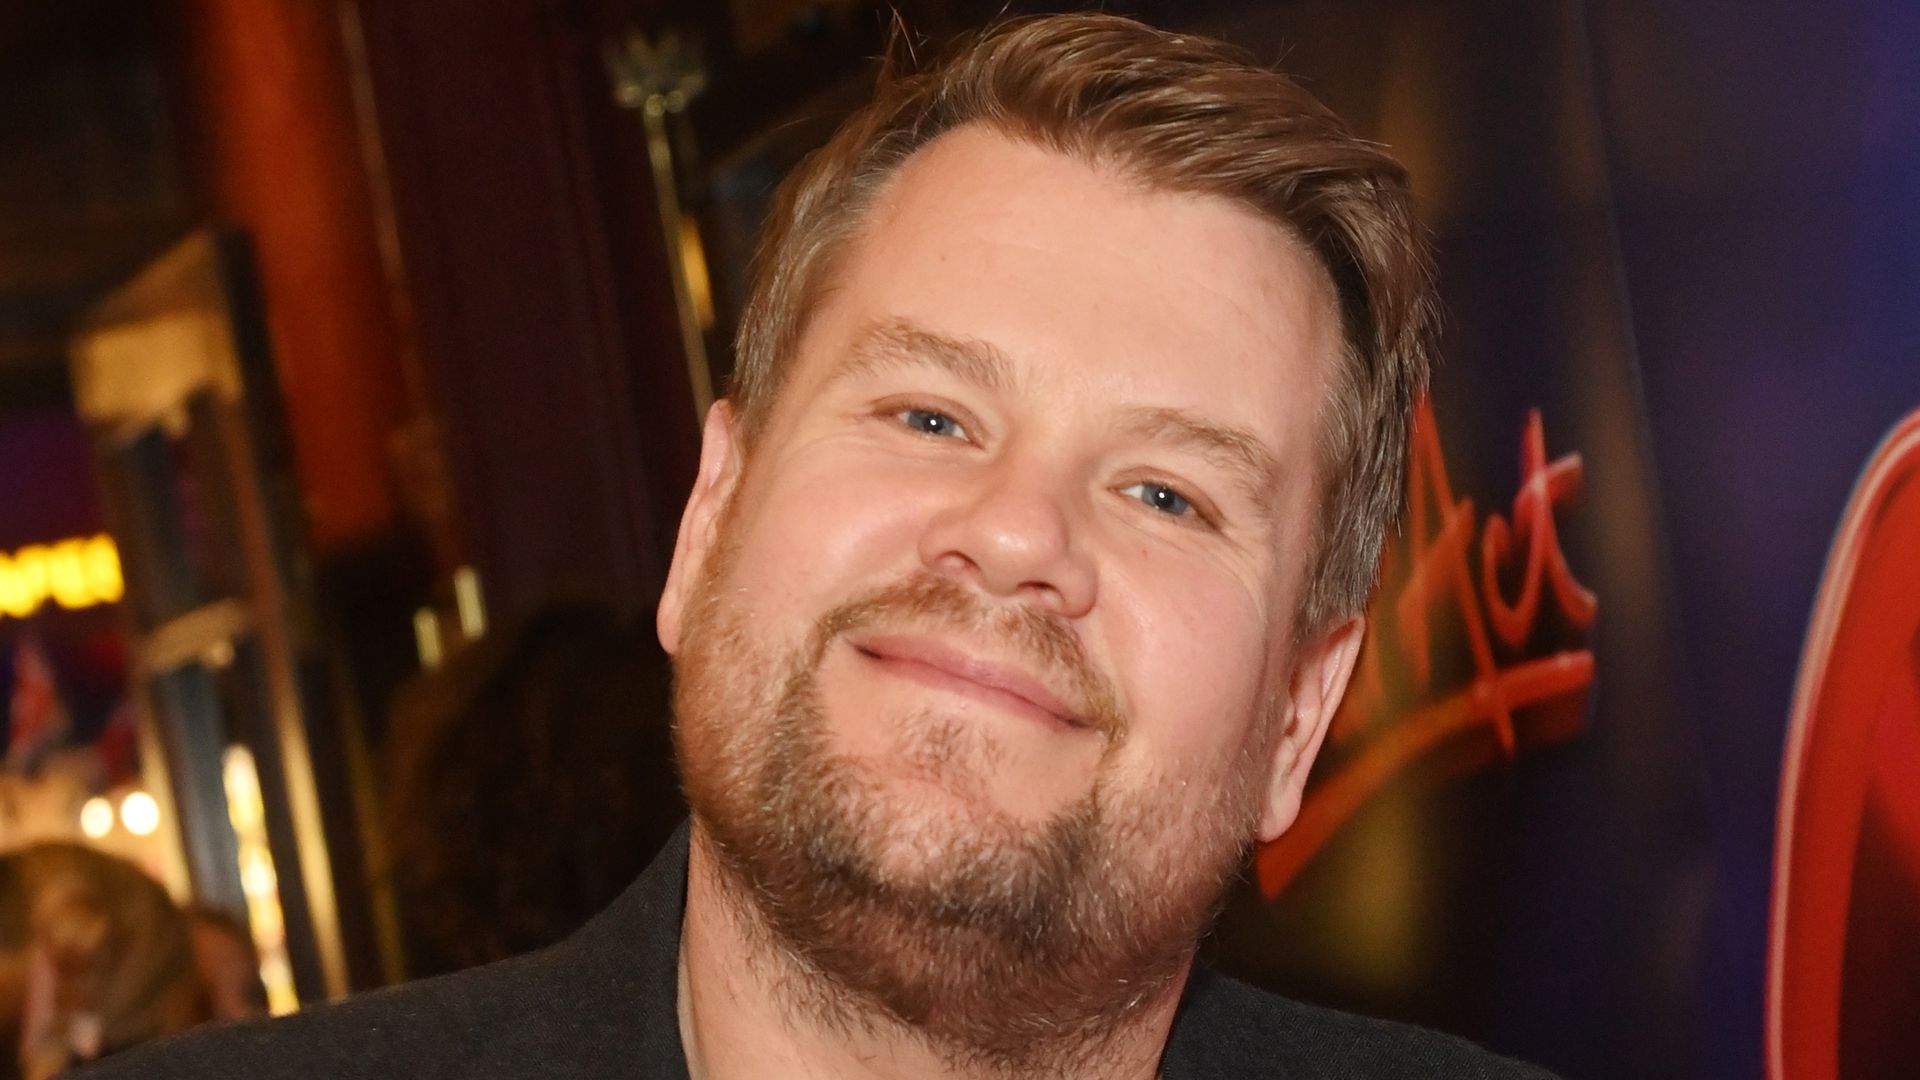 James Corden in a black jacket and shirt